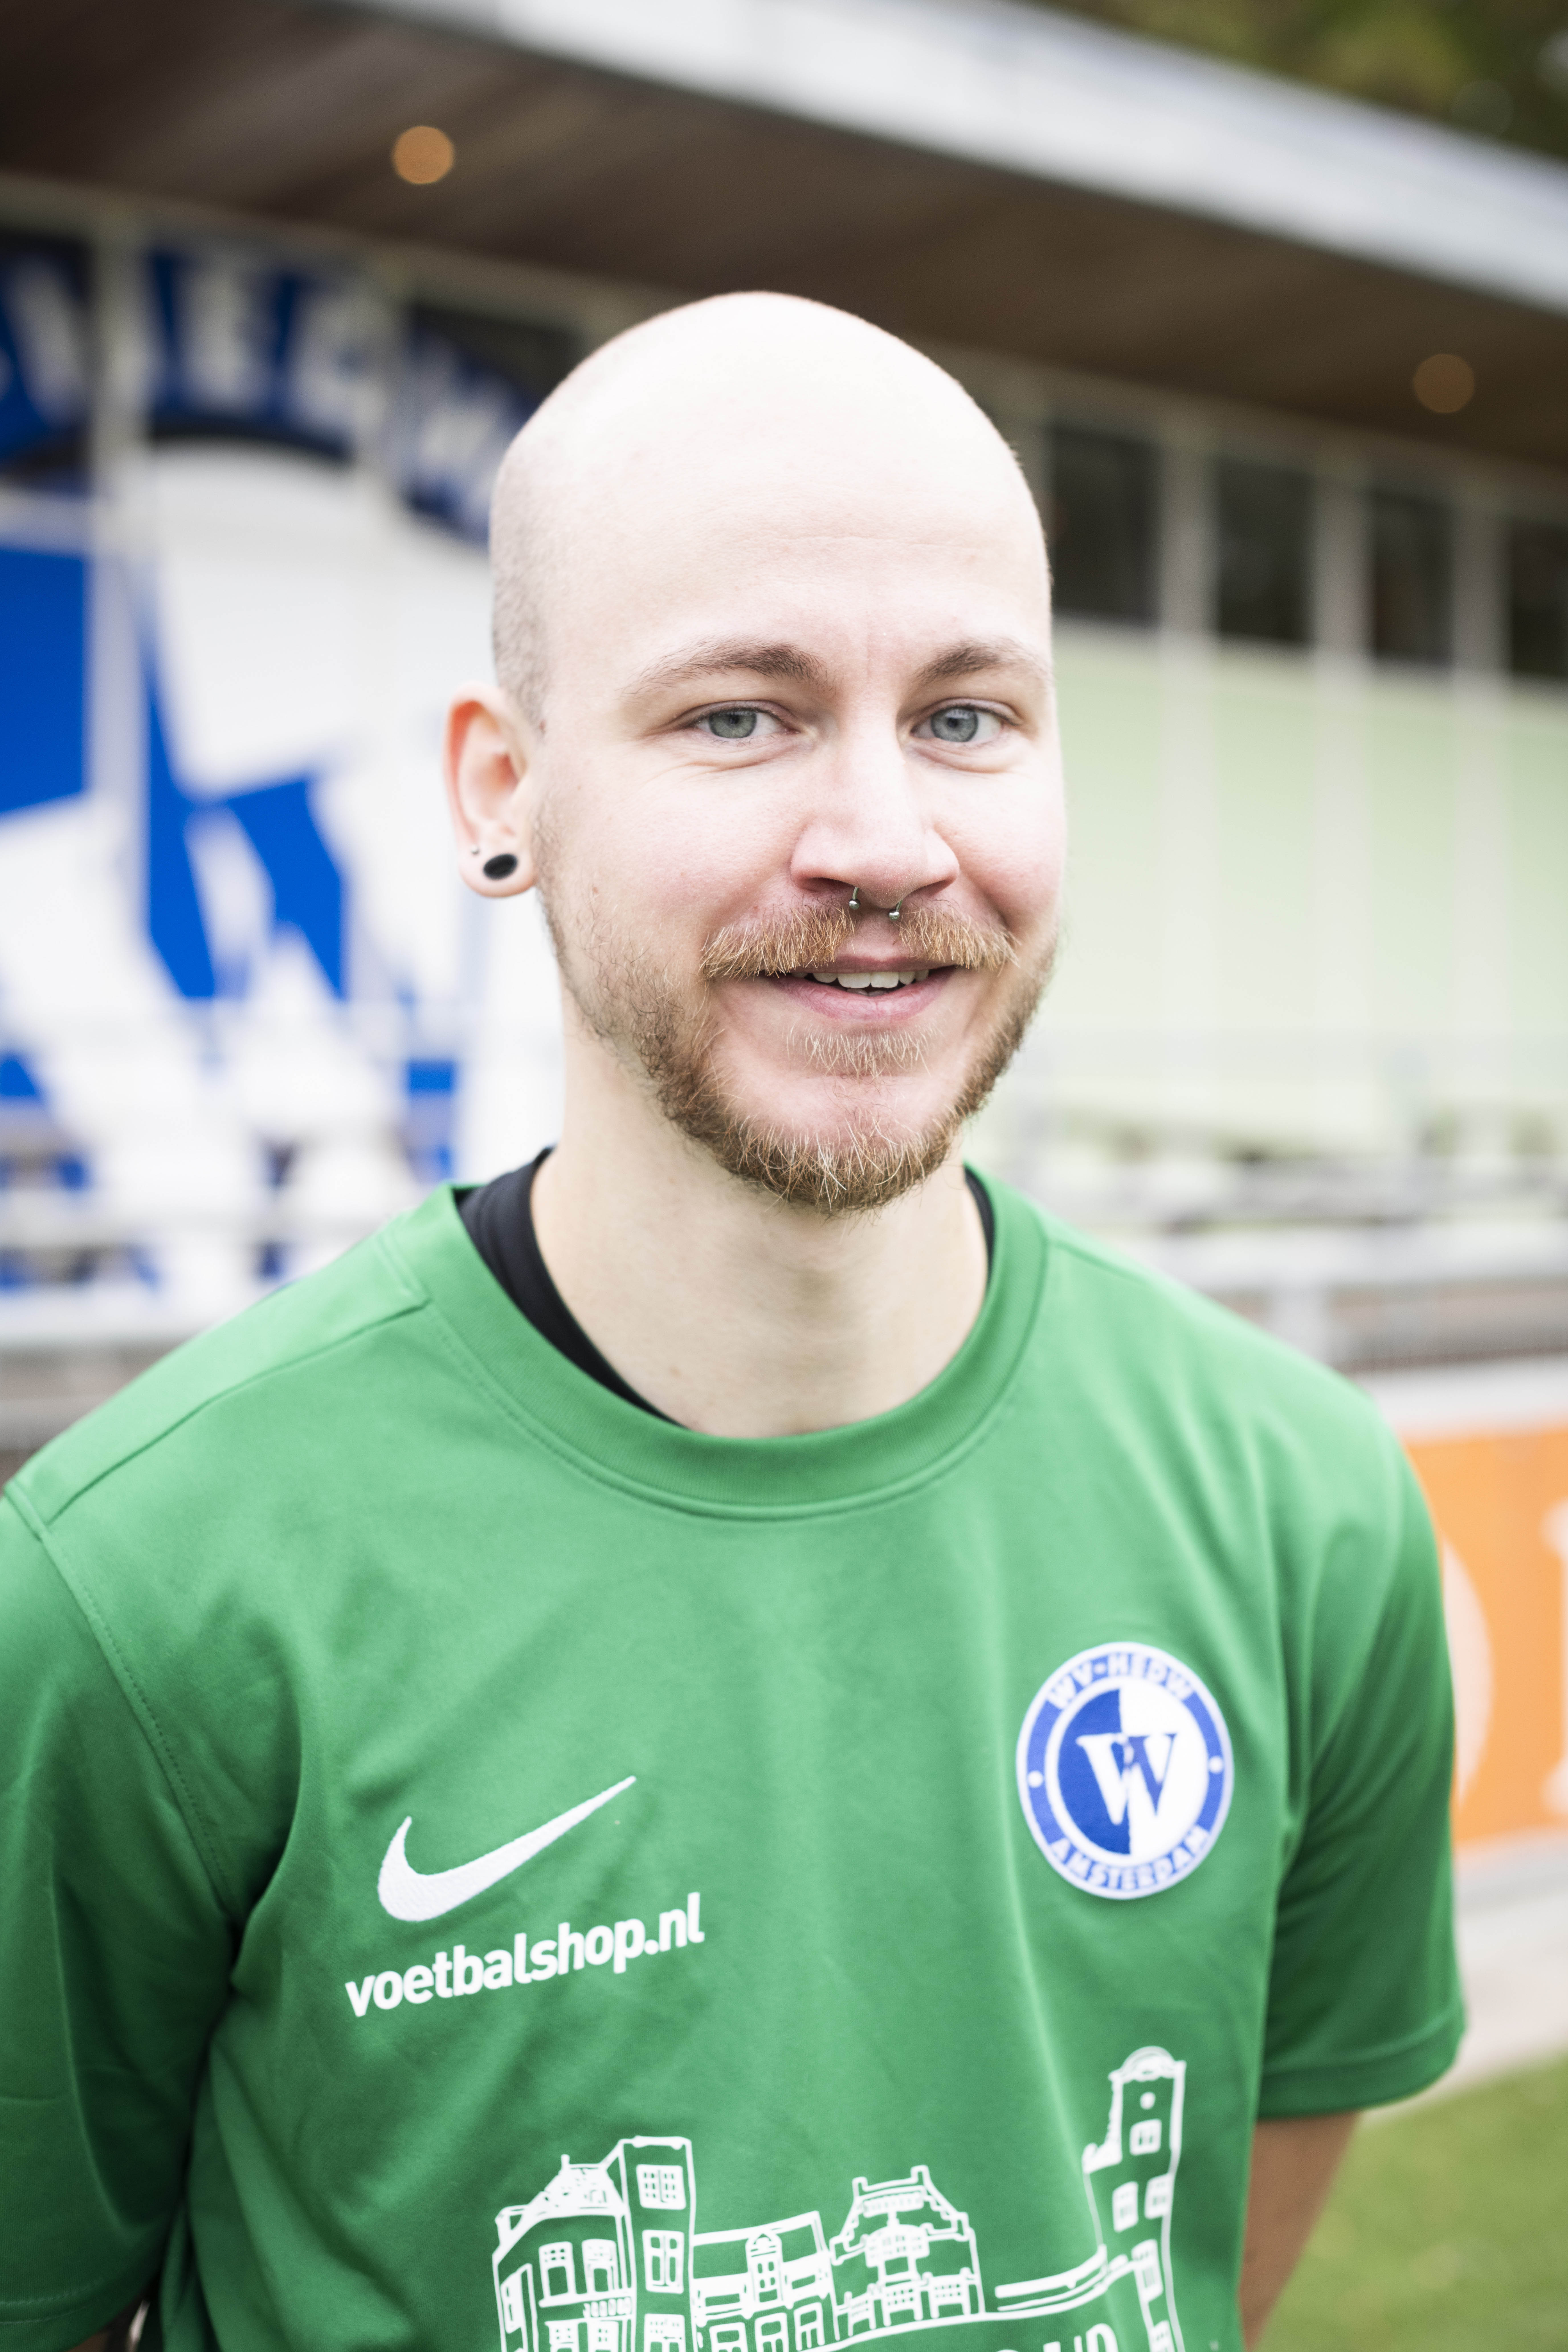 Portrait of a football player wearing a green football jersey on the pitch, he has piercings in his nose and ear, looks smiling at the camera